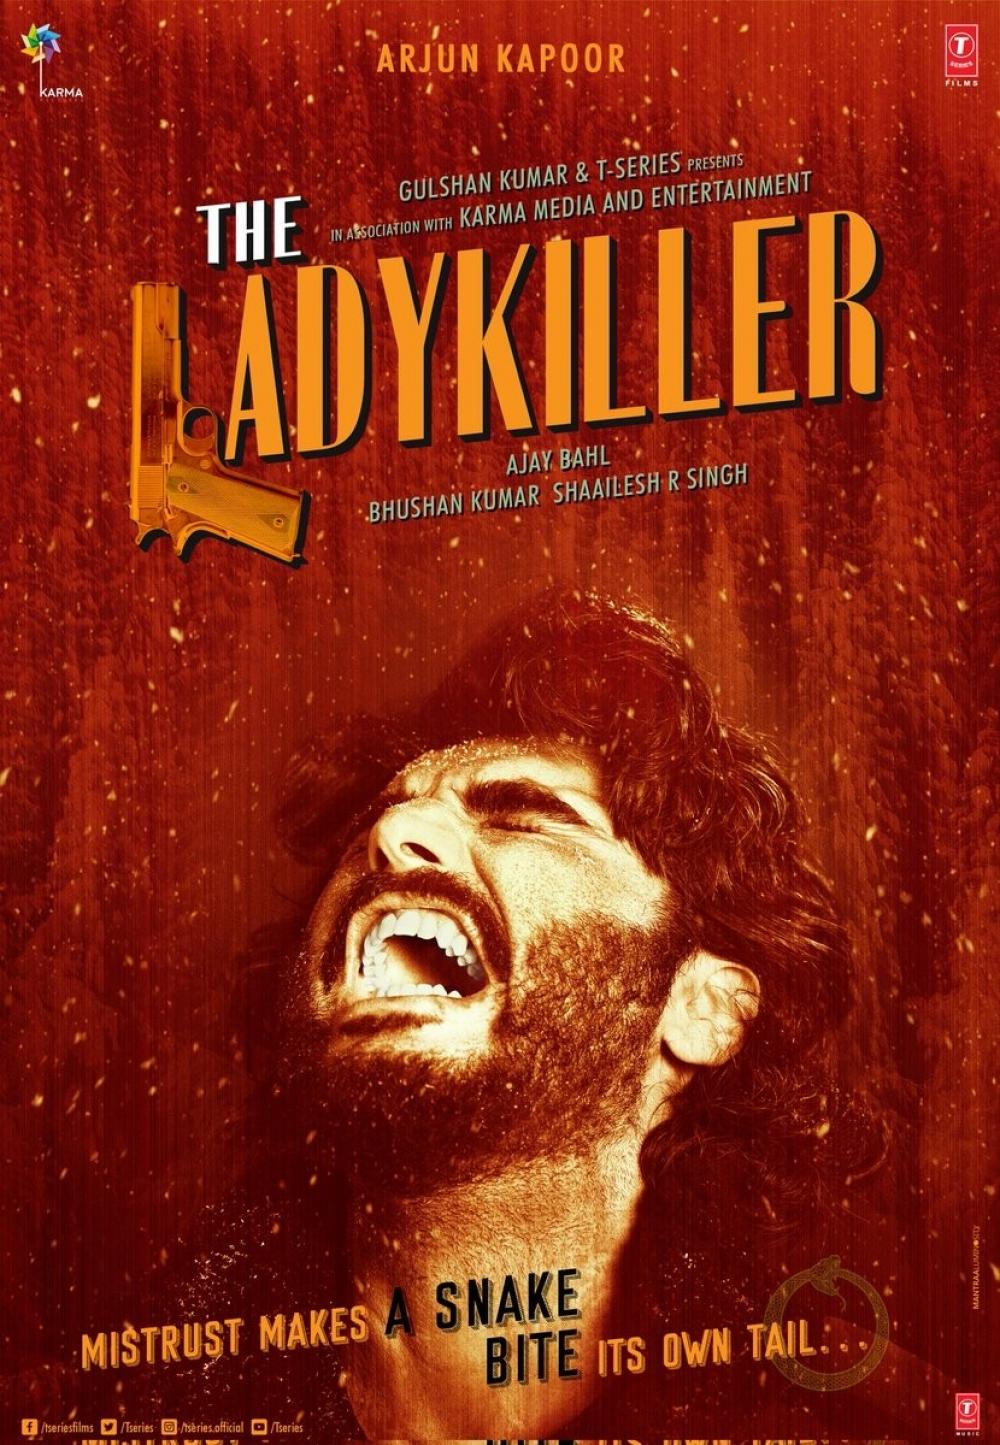 The Weekend Leader - Arjun Kapoor to star in 'nerve-racking' thriller 'The Lady Killer